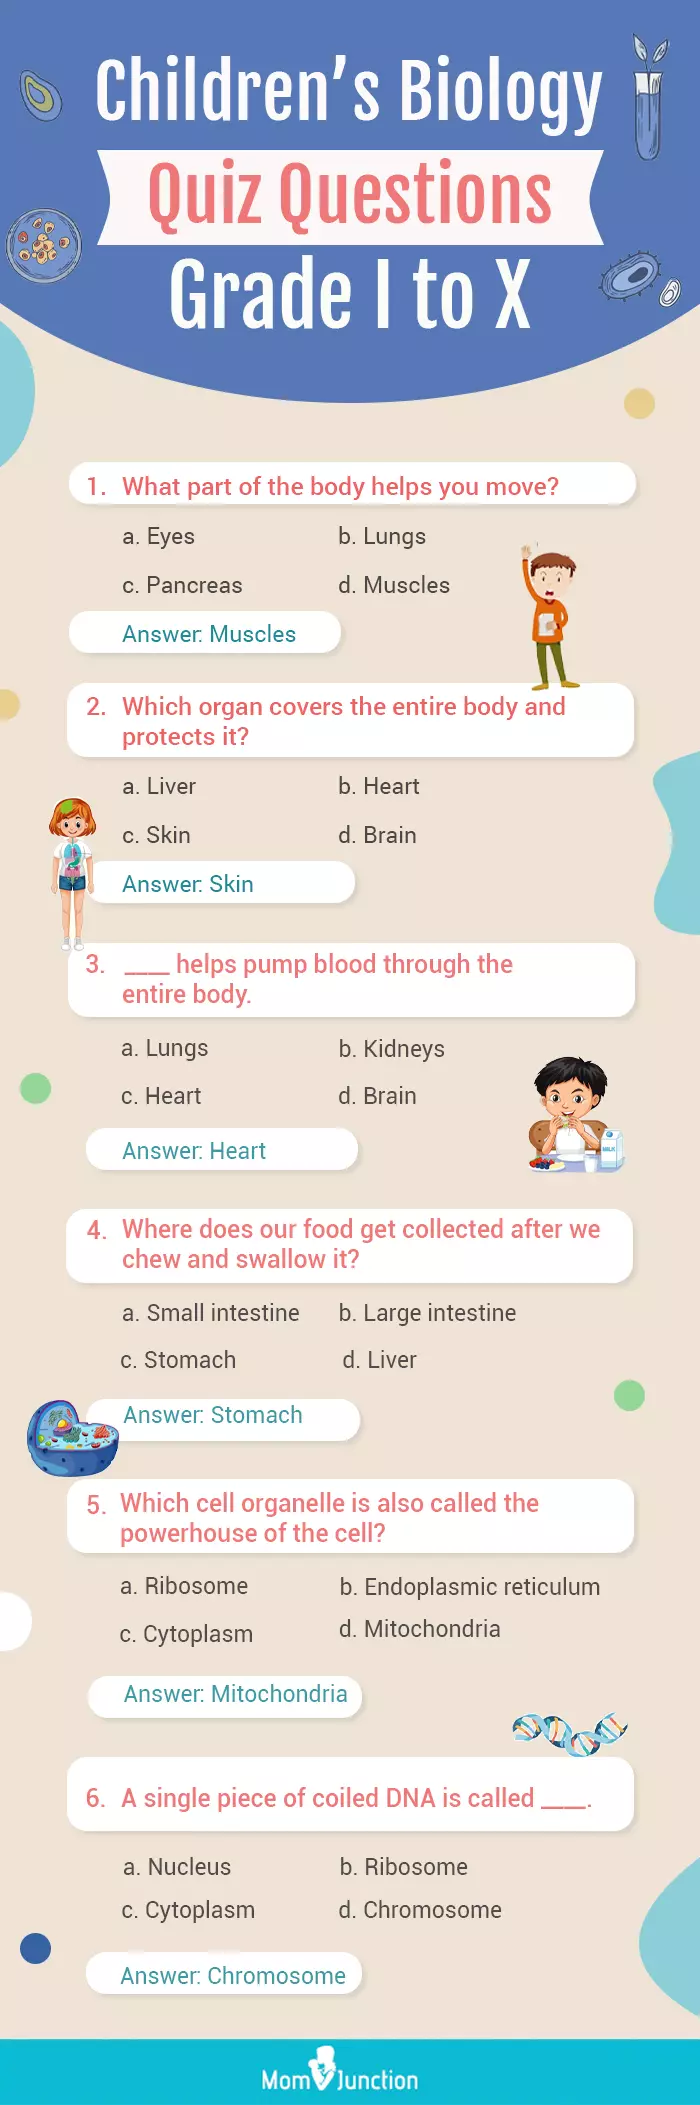 childrens biology quiz questions grade I to X (infographic)